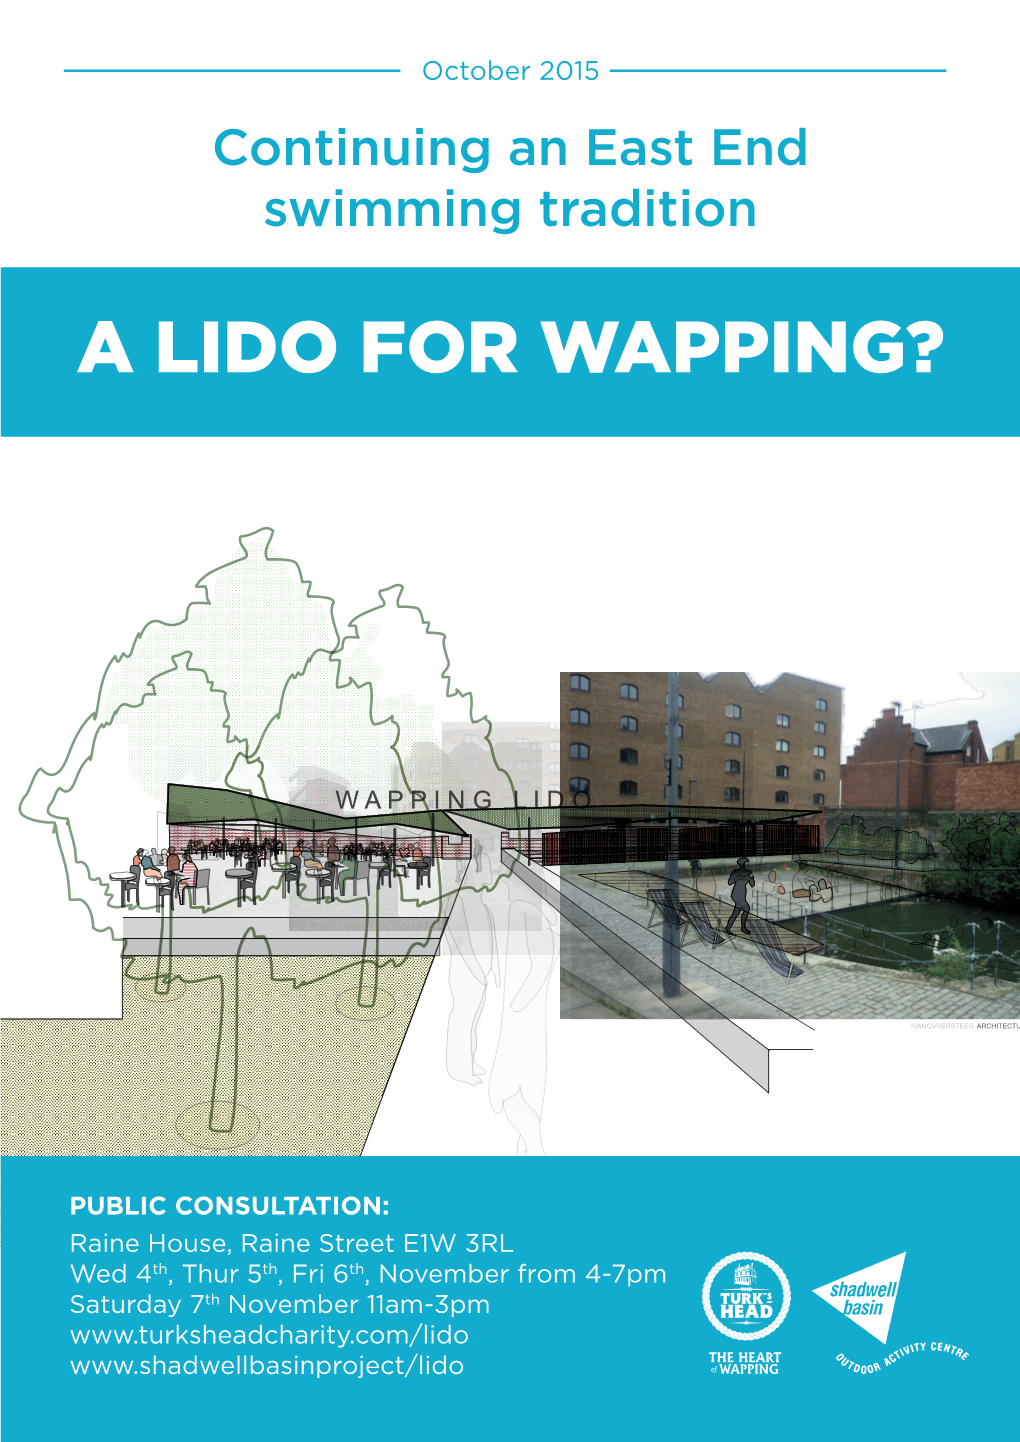 A Lido for Wapping?